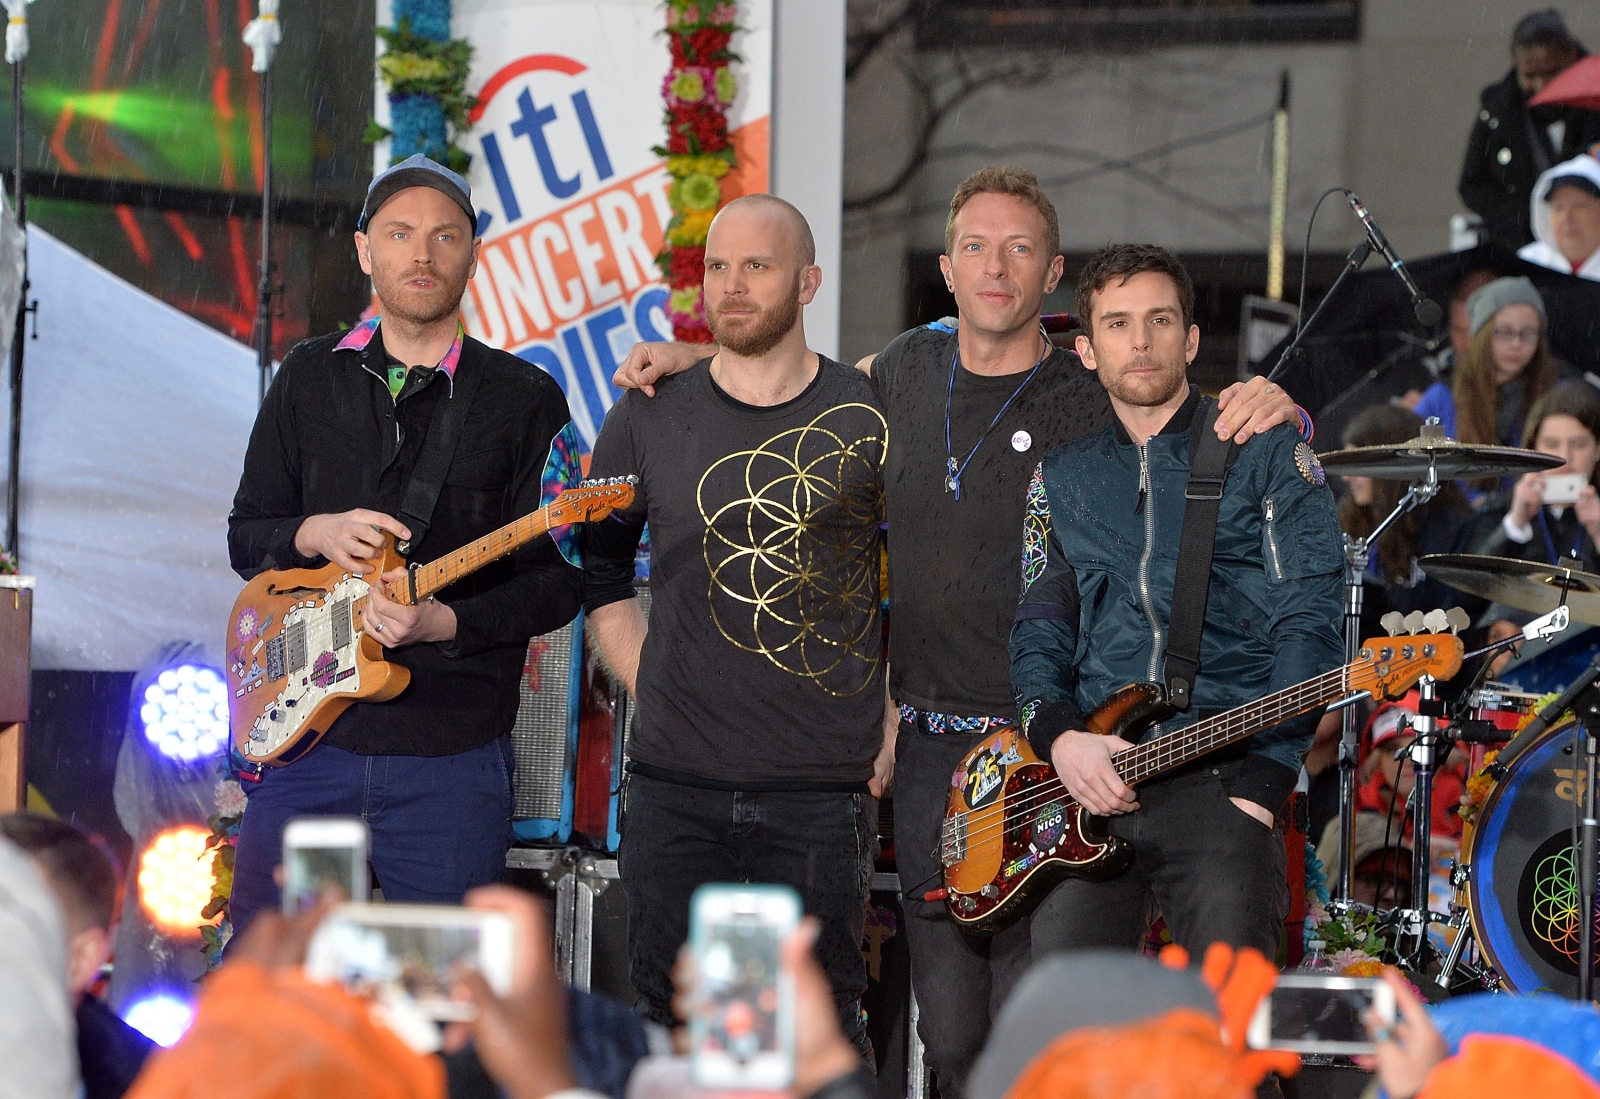 Glastonbury 2016: Will headliners Coldplay hold fans' interest if they stop releasing ...1600 x 1099